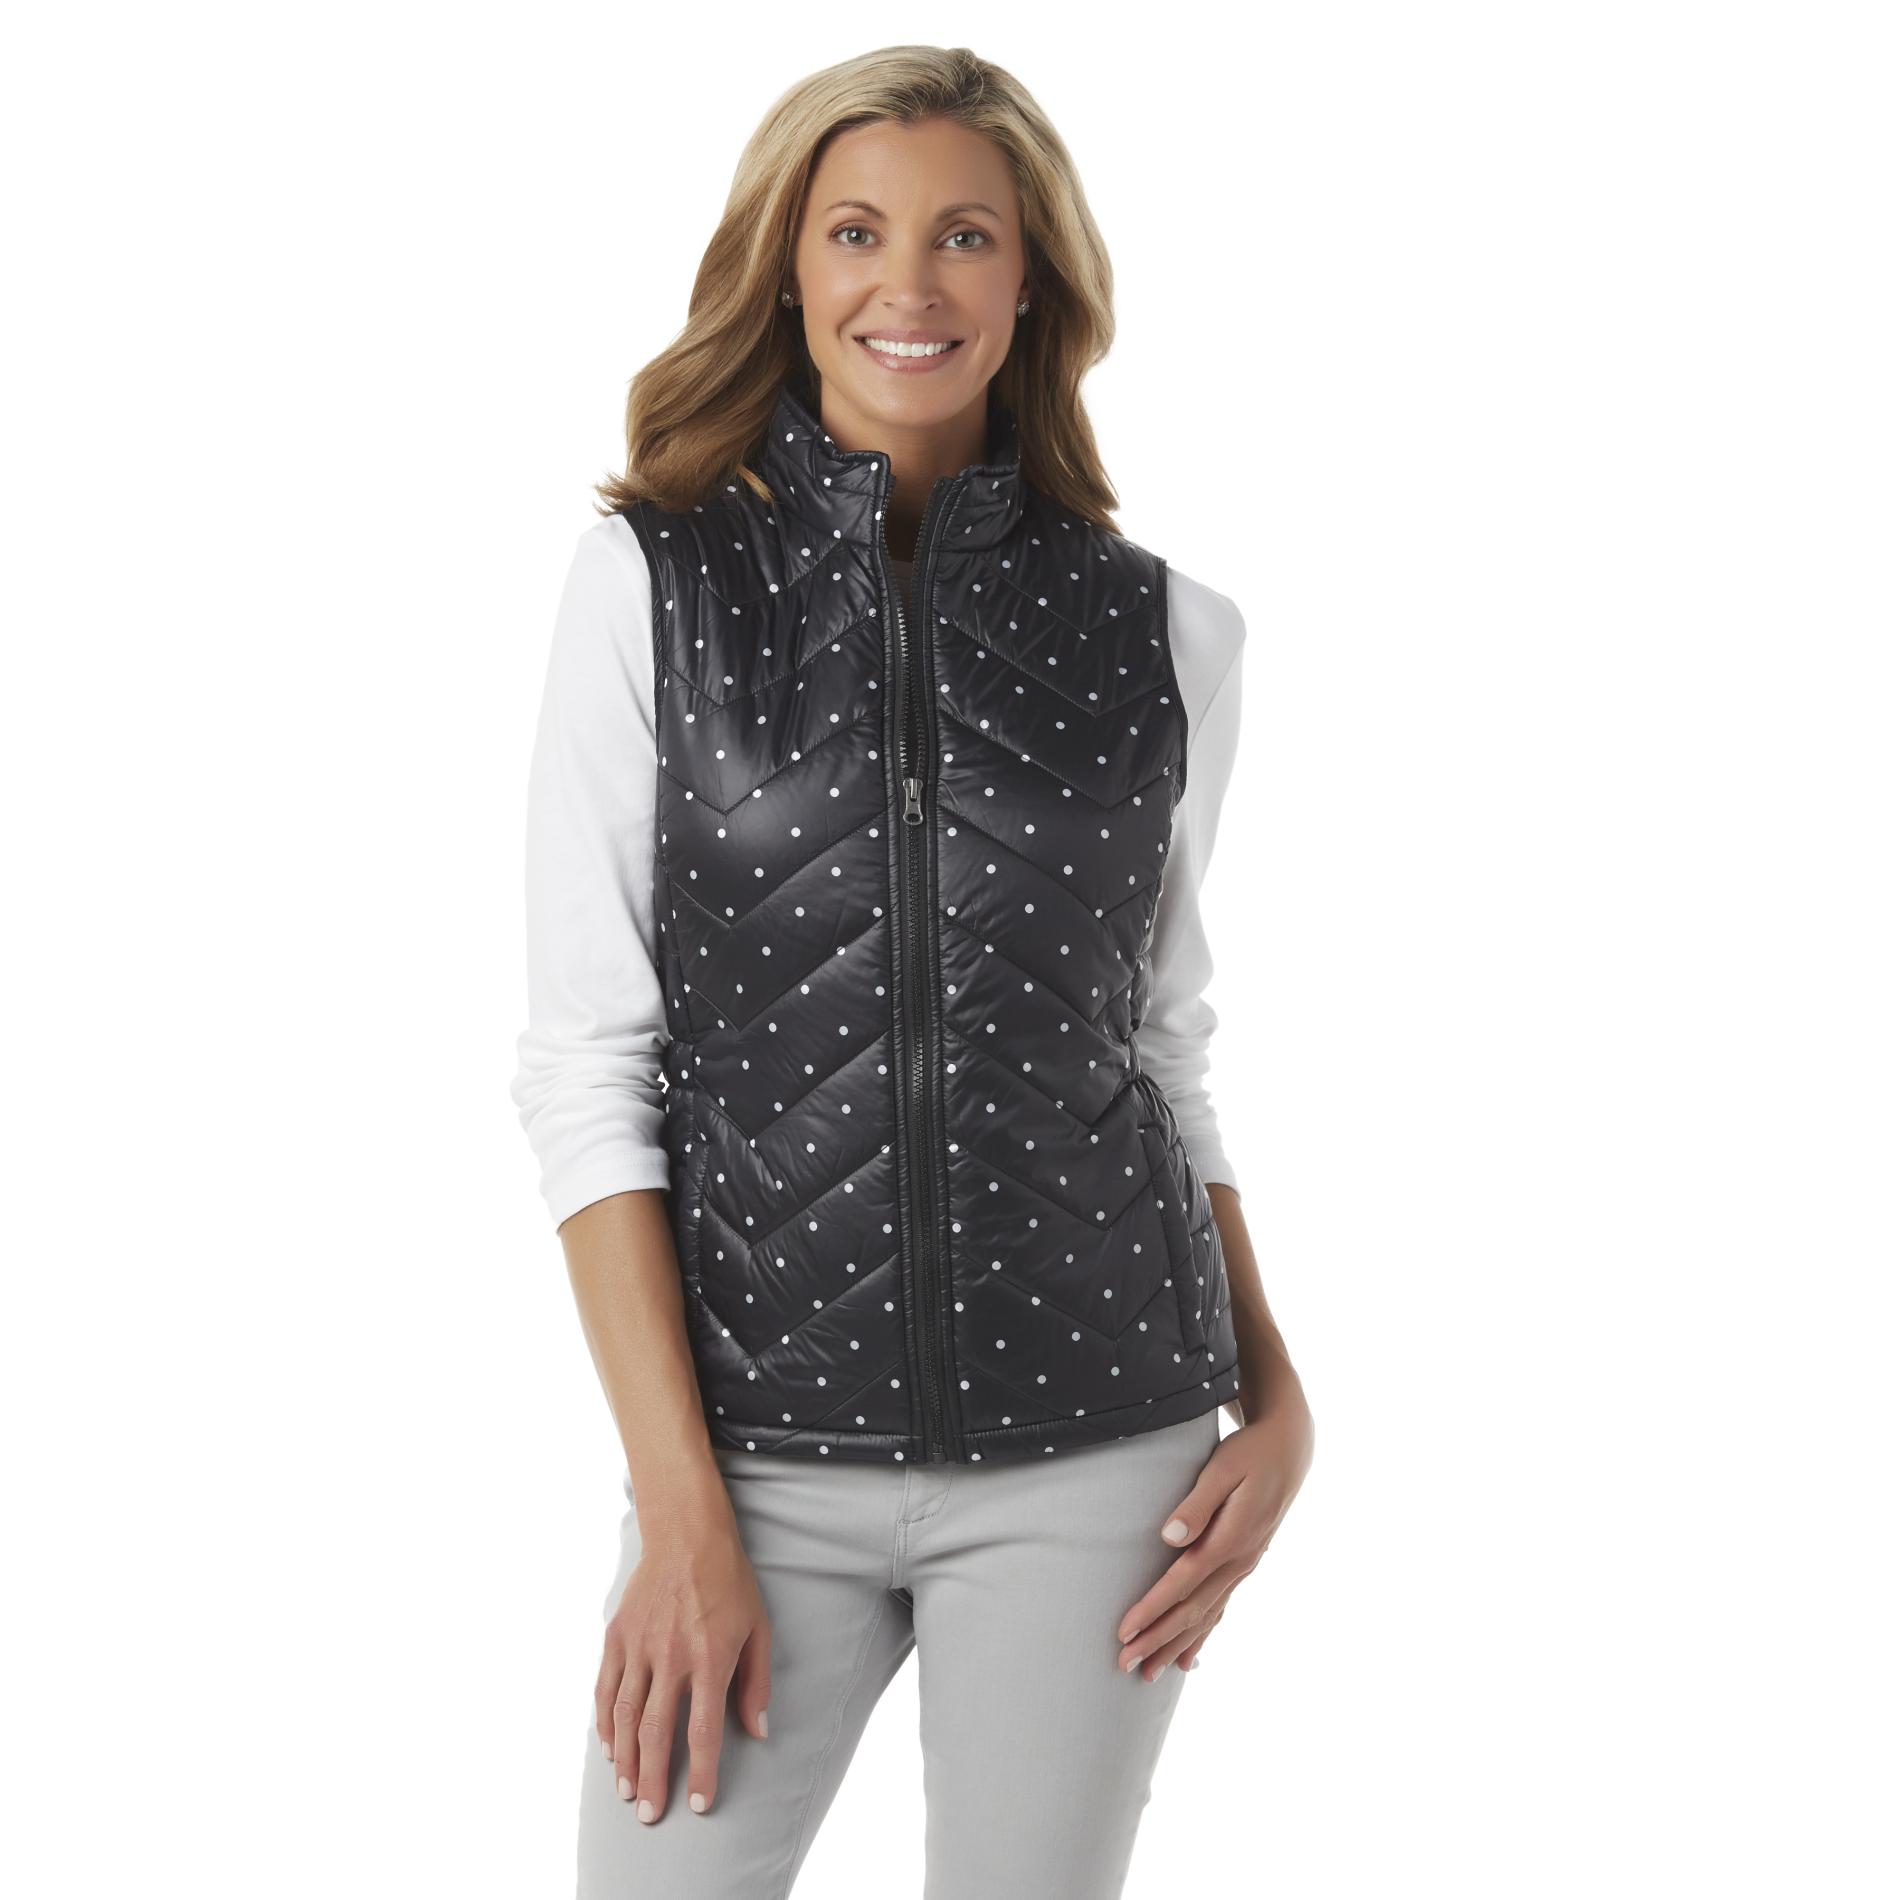 Basic Editions Women's Quilted Vest - Polka Dot